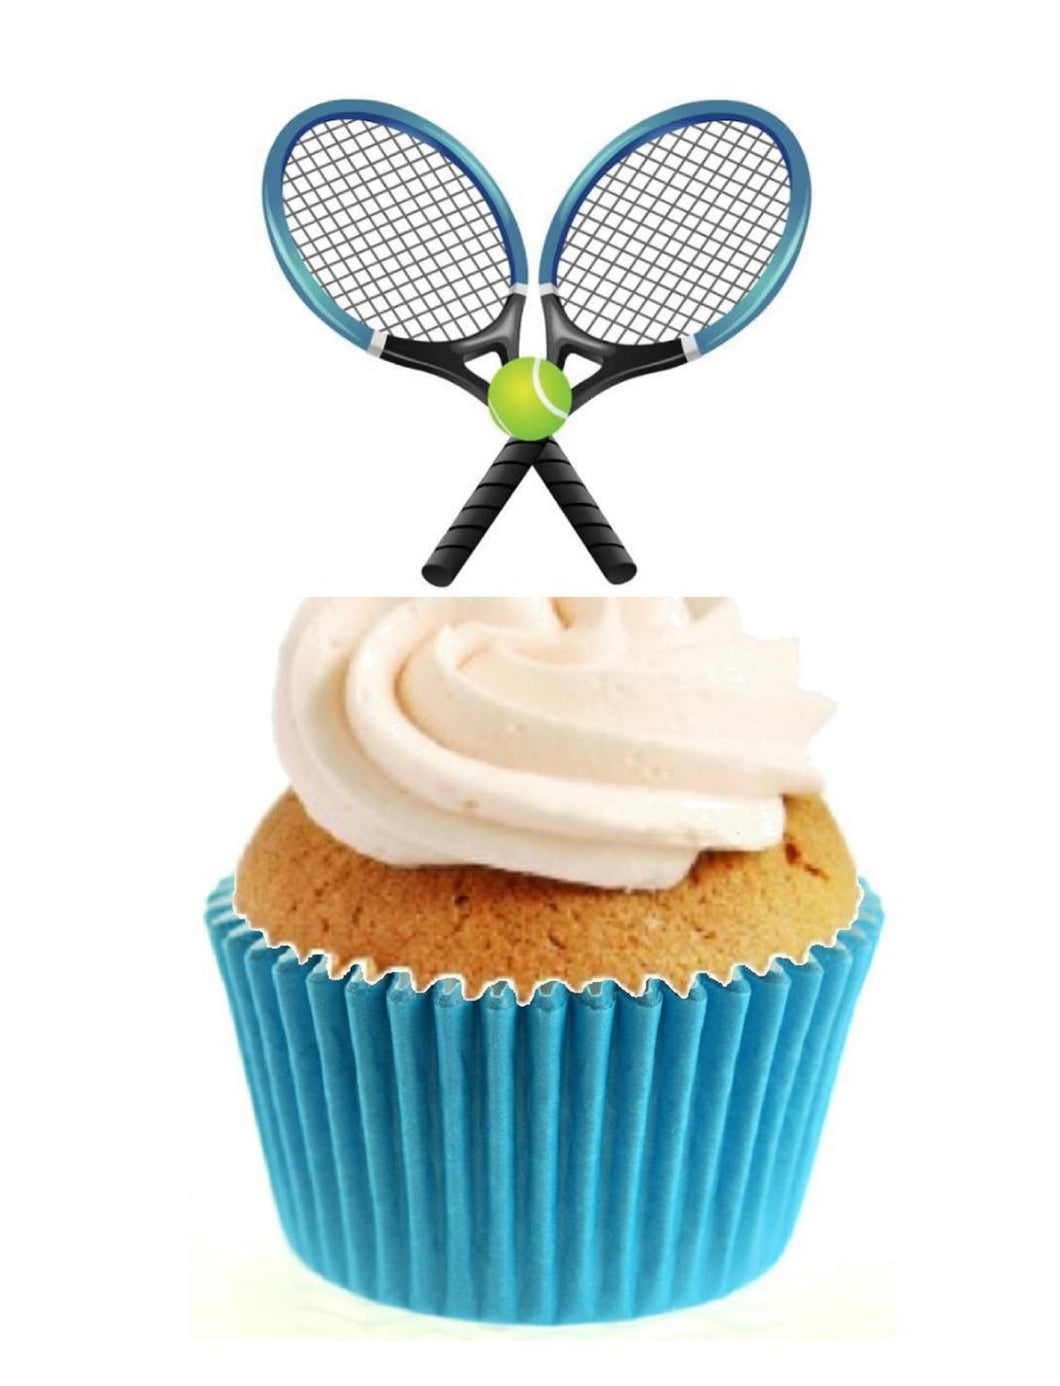 Tennis Rackets & Ball Stand Up Cake Toppers (12 pack)